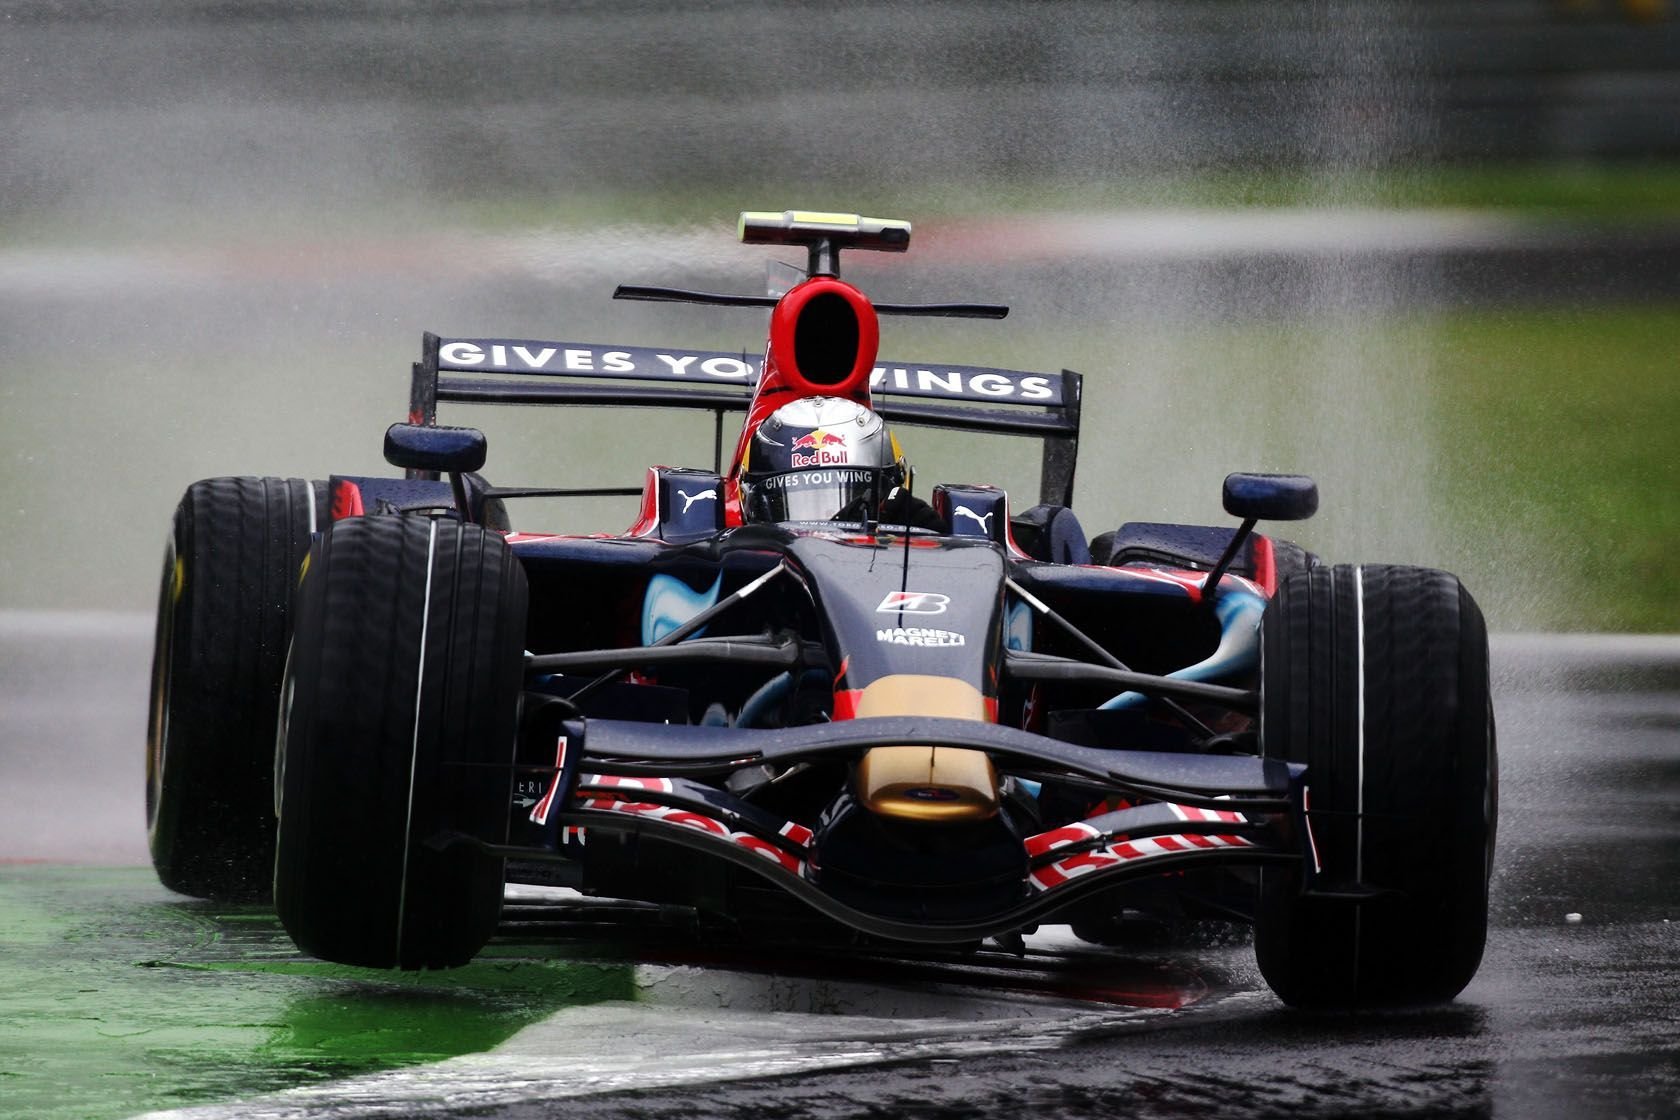 5 Formula 1 Cars That Surprisingly Won A Grand Prix (5 That Should Have, But Didn't)